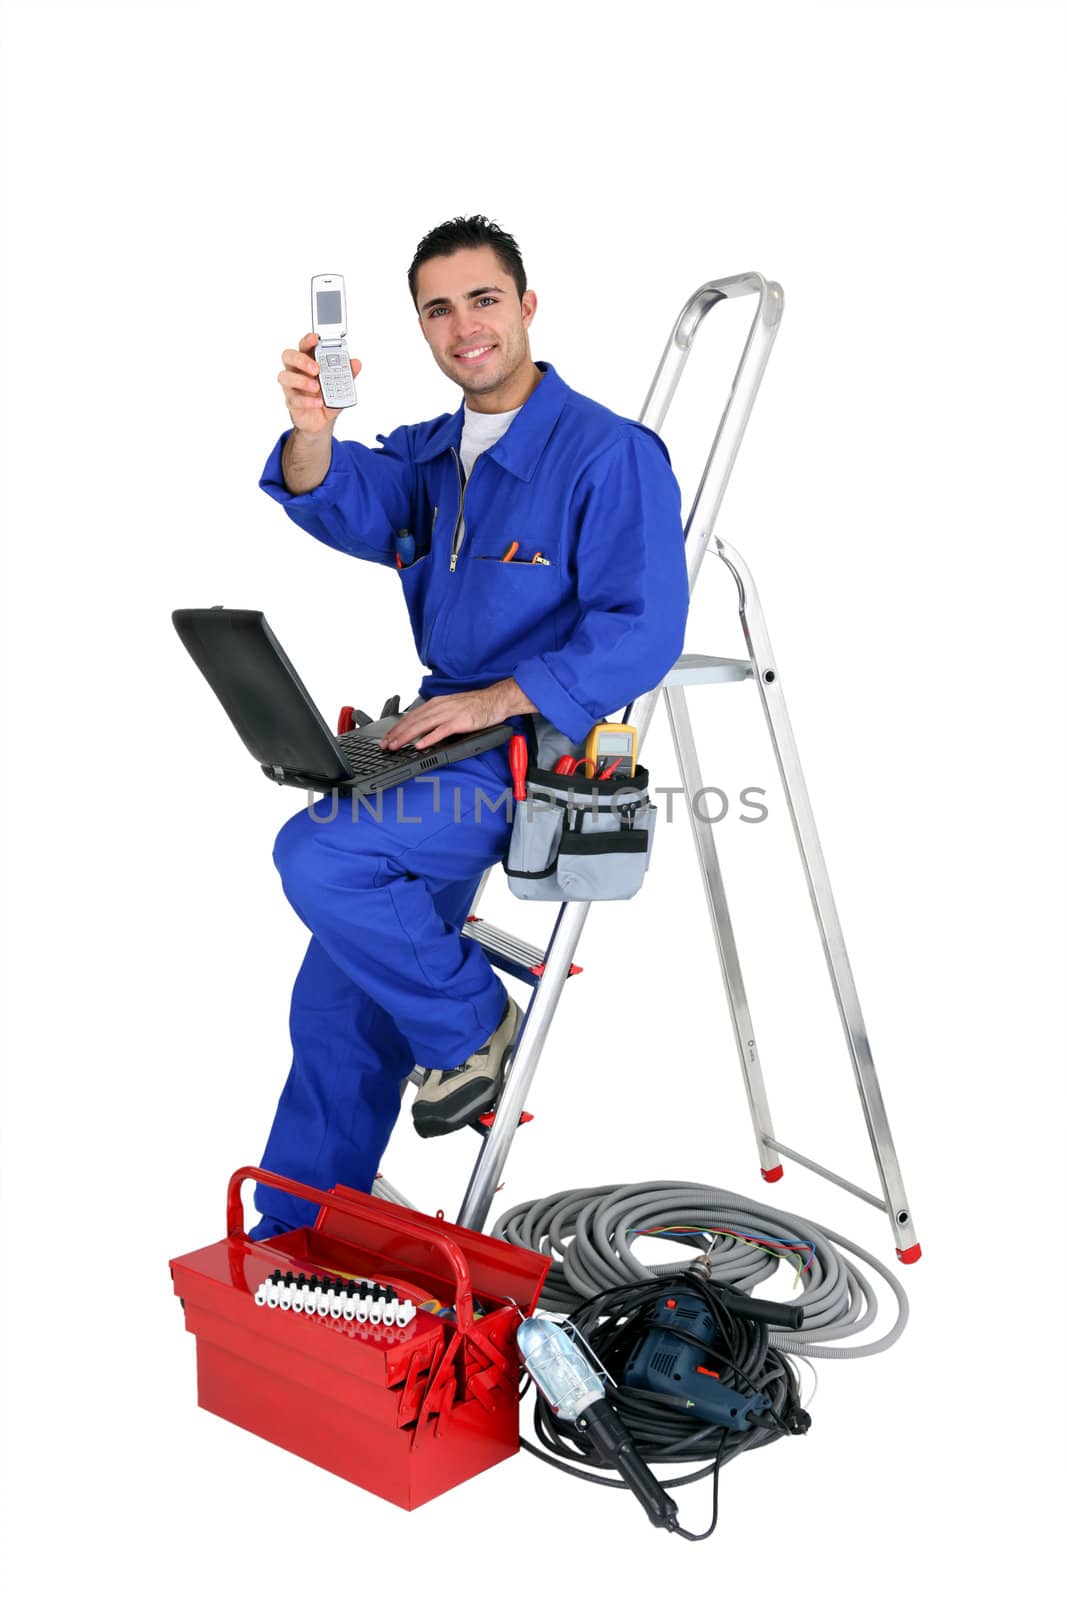 Technician with laptop and cellphone leaning on a ladder